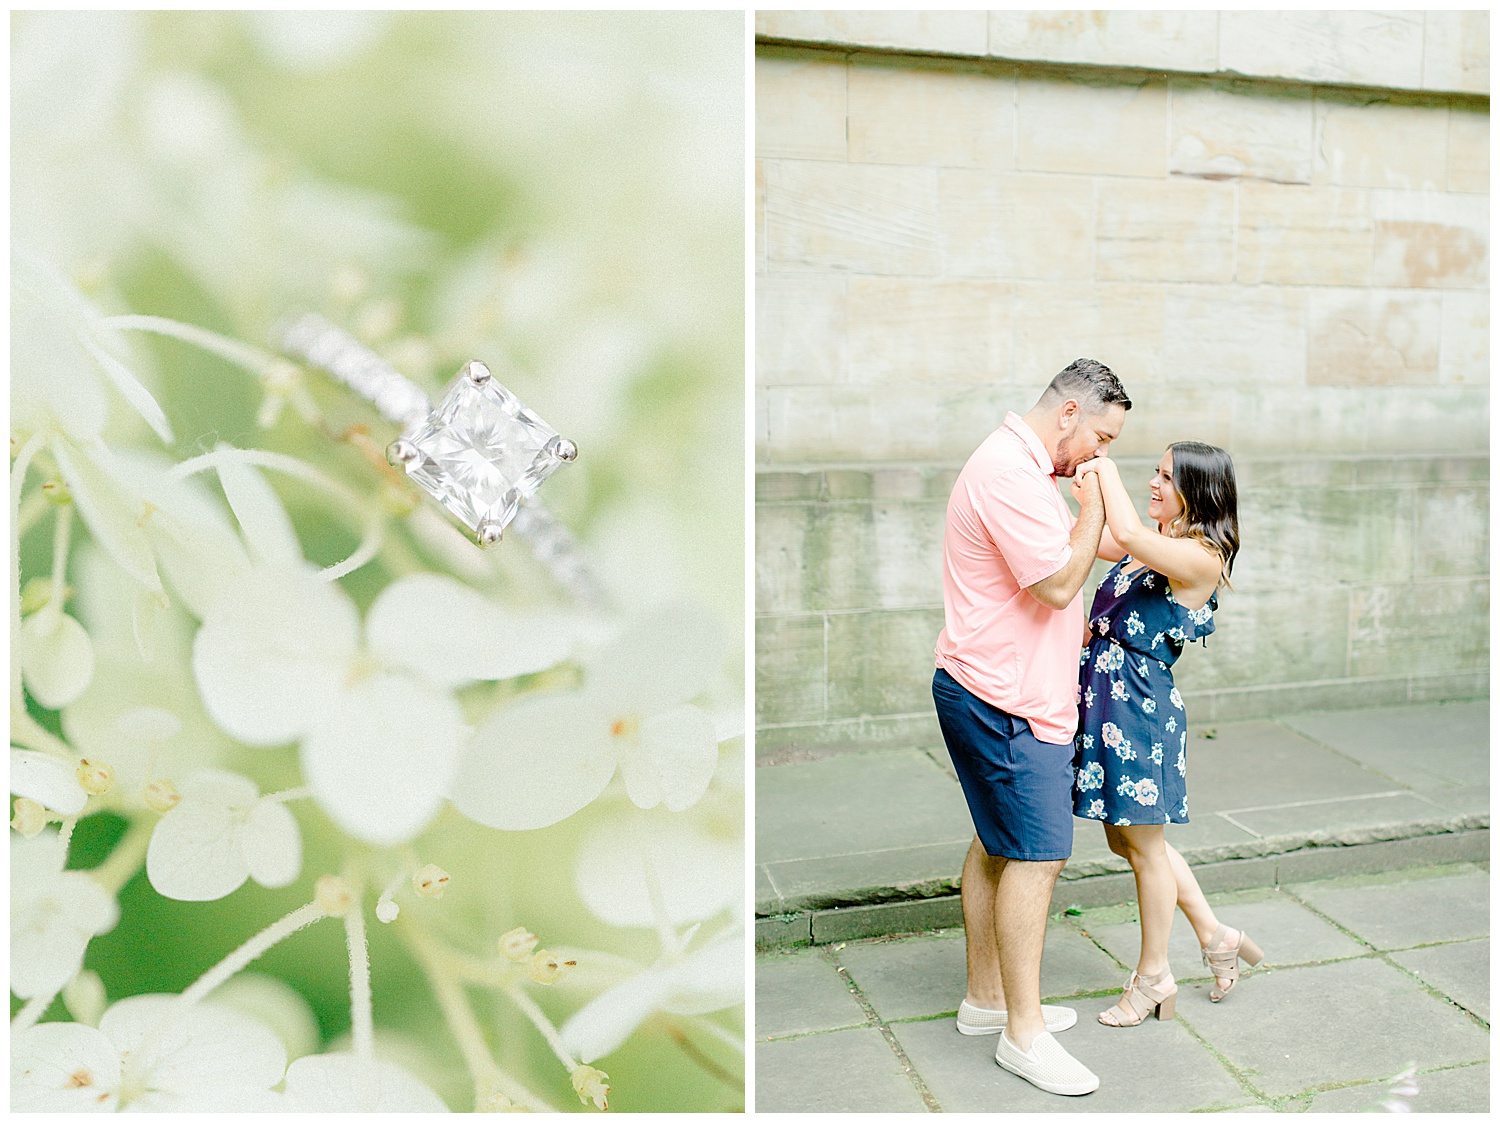 Cleveland_Cultural_Gardens_Engagement_Ohio_Kate_Mannella_Photography